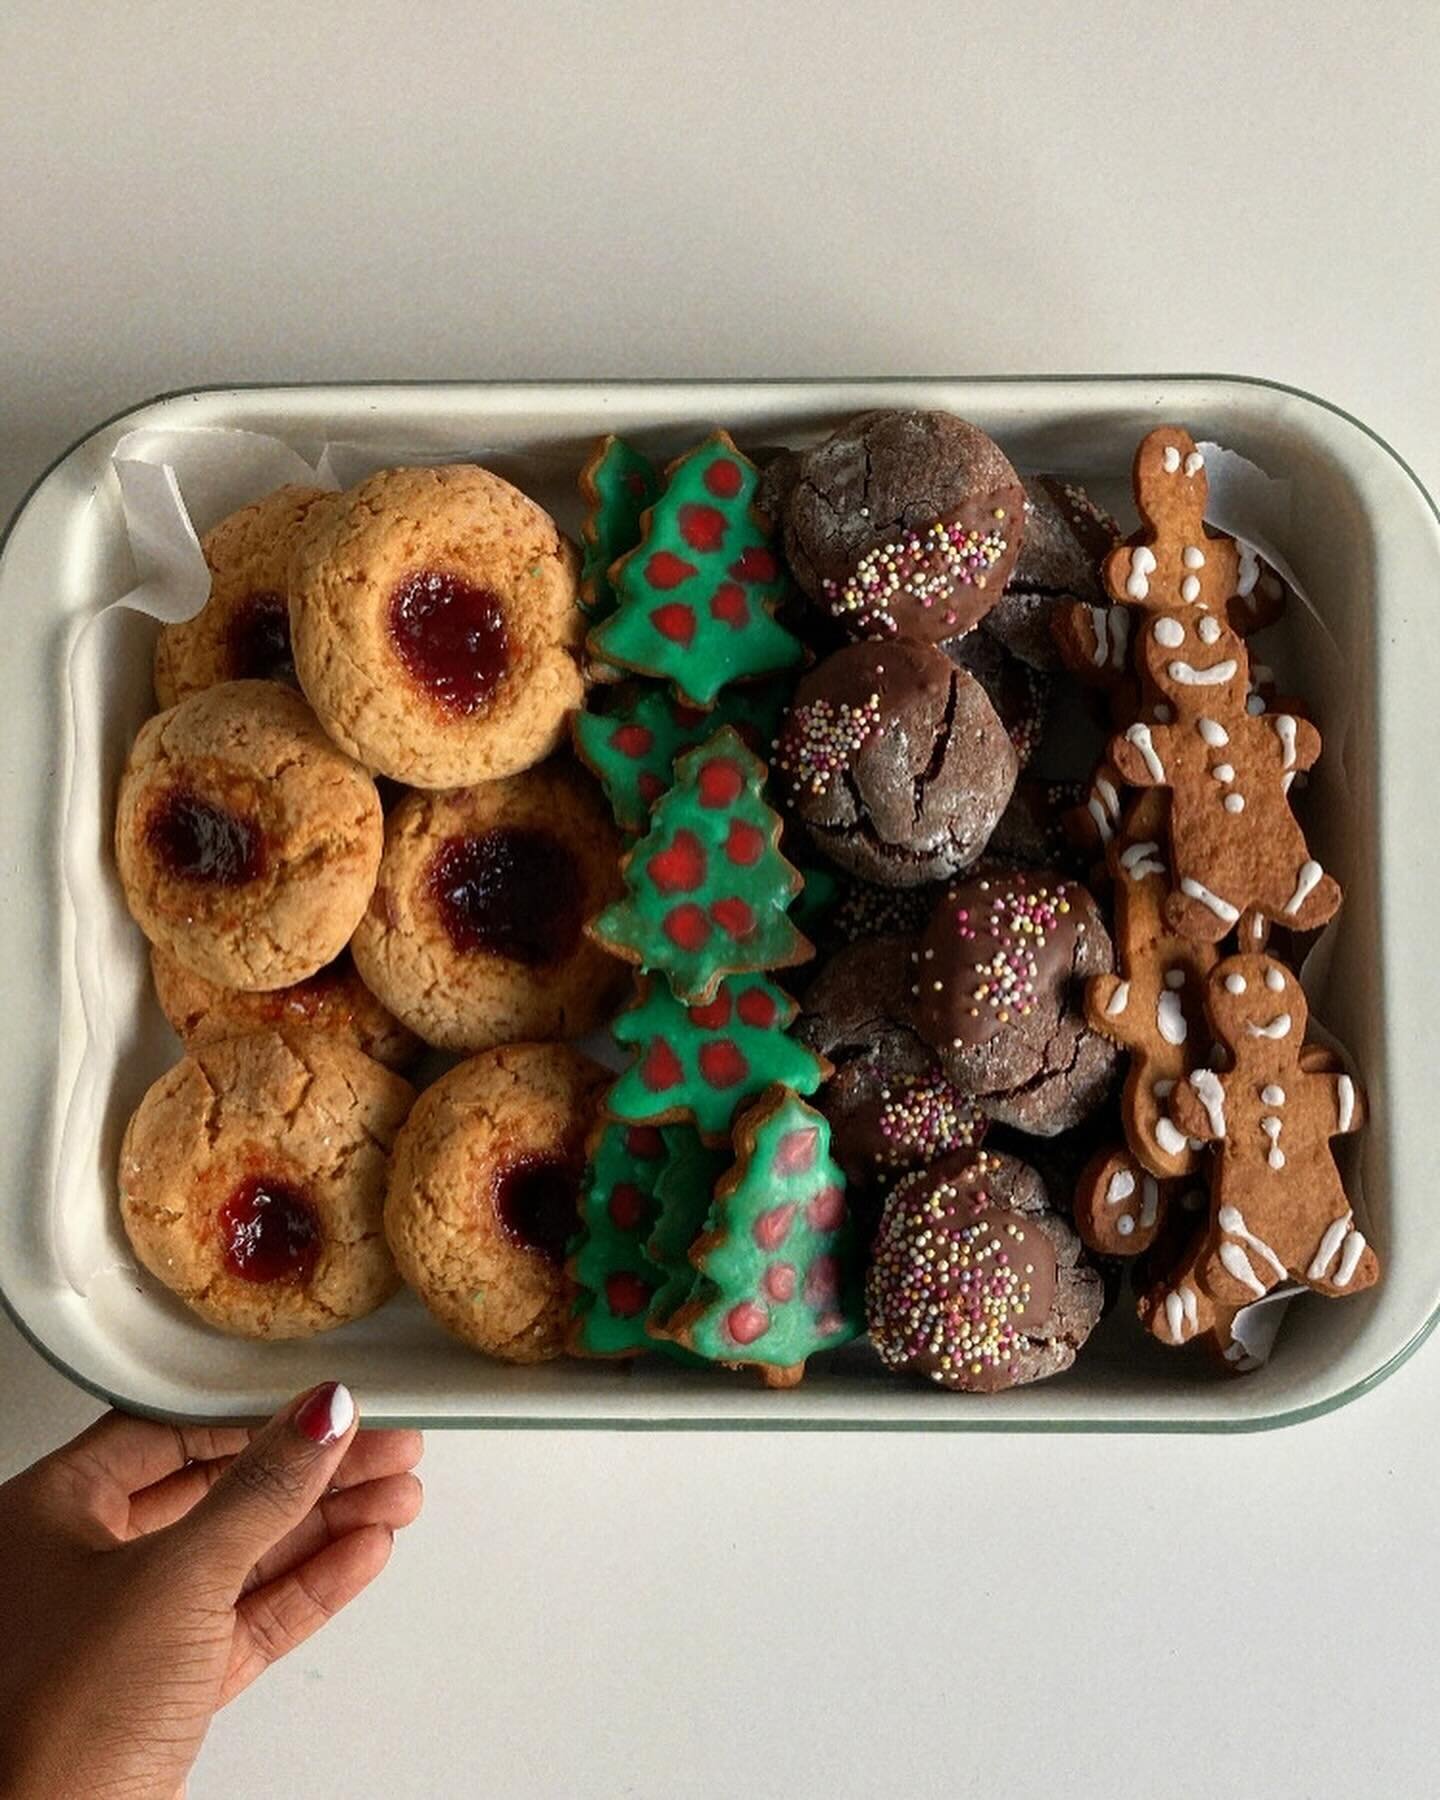 &lsquo;tis the season for homemade cookies, sparkly socks, attempting to sew stockings, dinner parties, arts &amp; crafts, more dinner parties, l-o-v-e, a good book &amp; some wine! See you on the other side! xx 🥰🎄🤶🏾